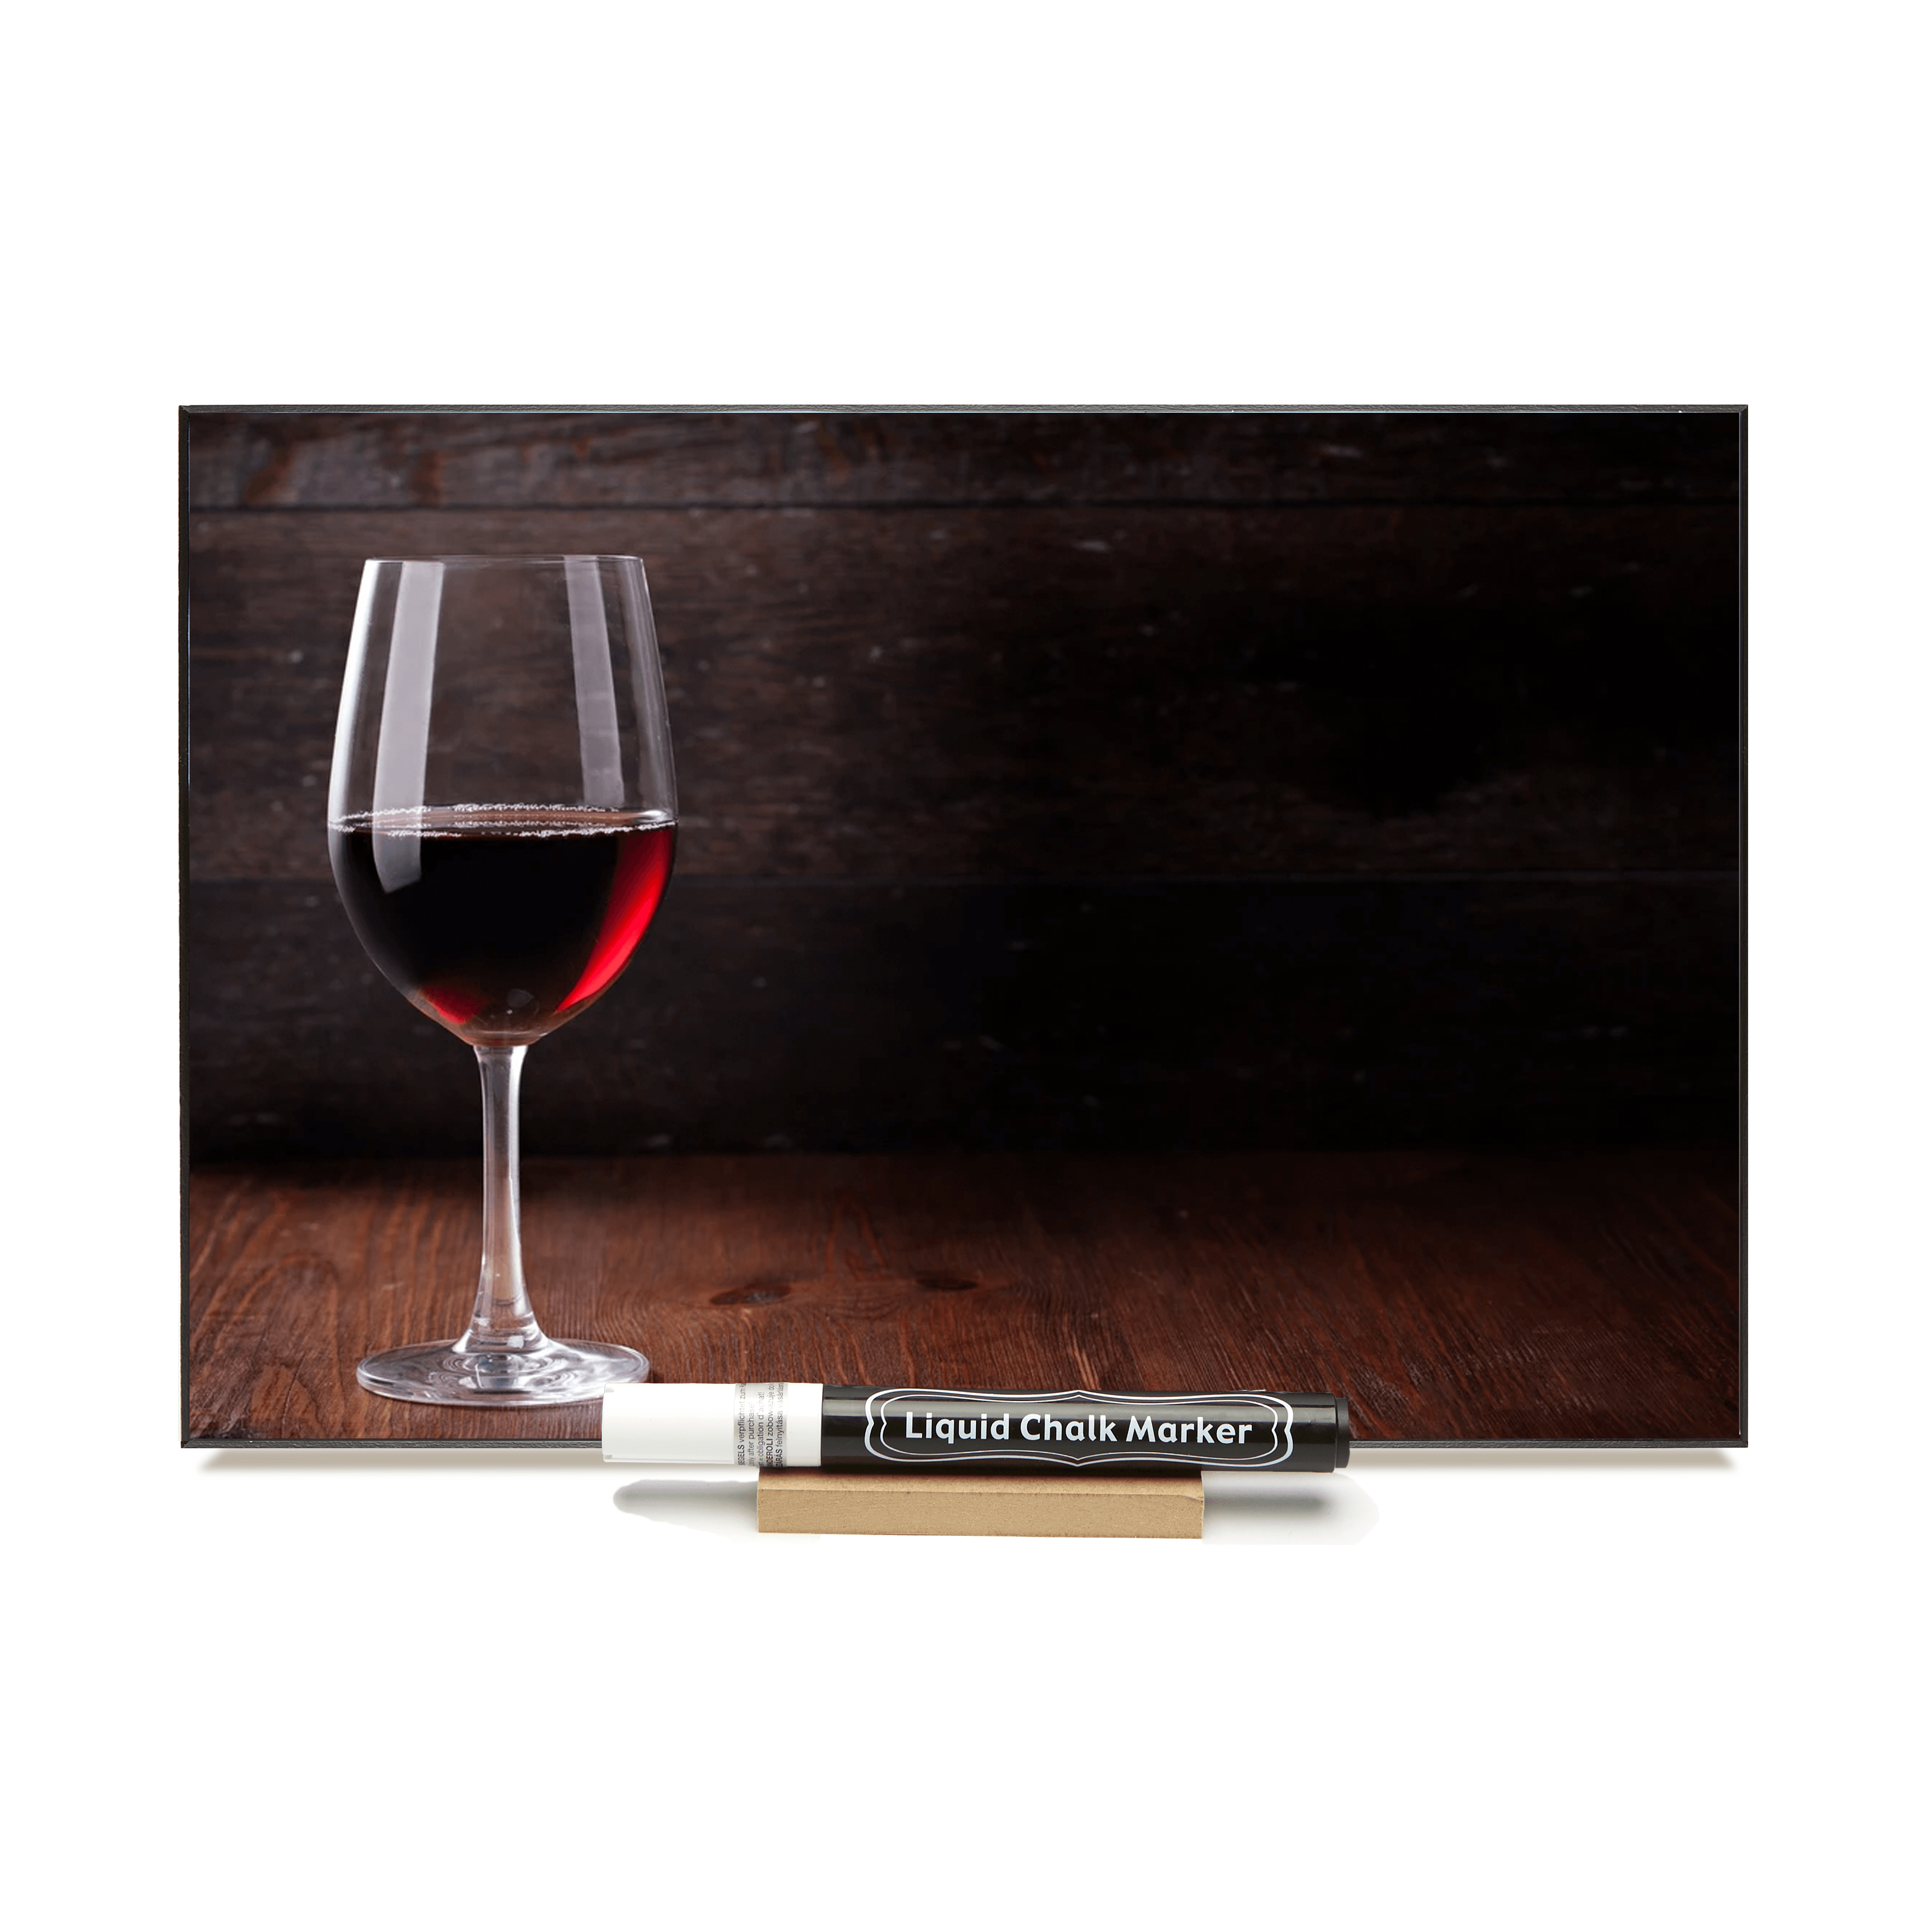 "Red Wine Pouring - horizontal" PHOTO CHALKBOARD - Includes Chalkboard, Chalk Marker and Standine